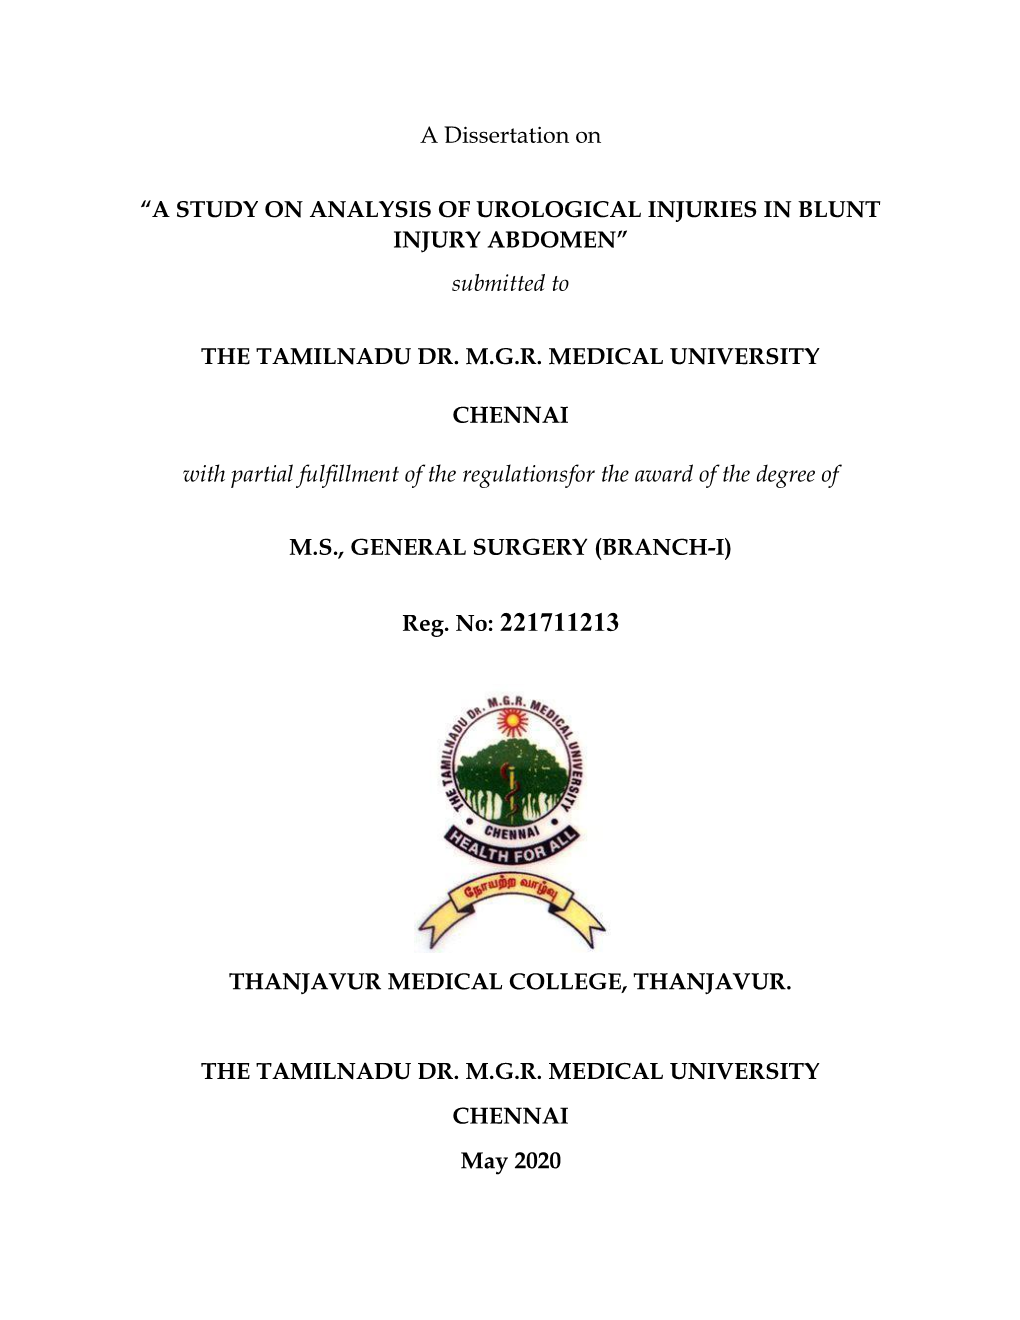 A Dissertation on “A STUDY on ANALYSIS of UROLOGICAL